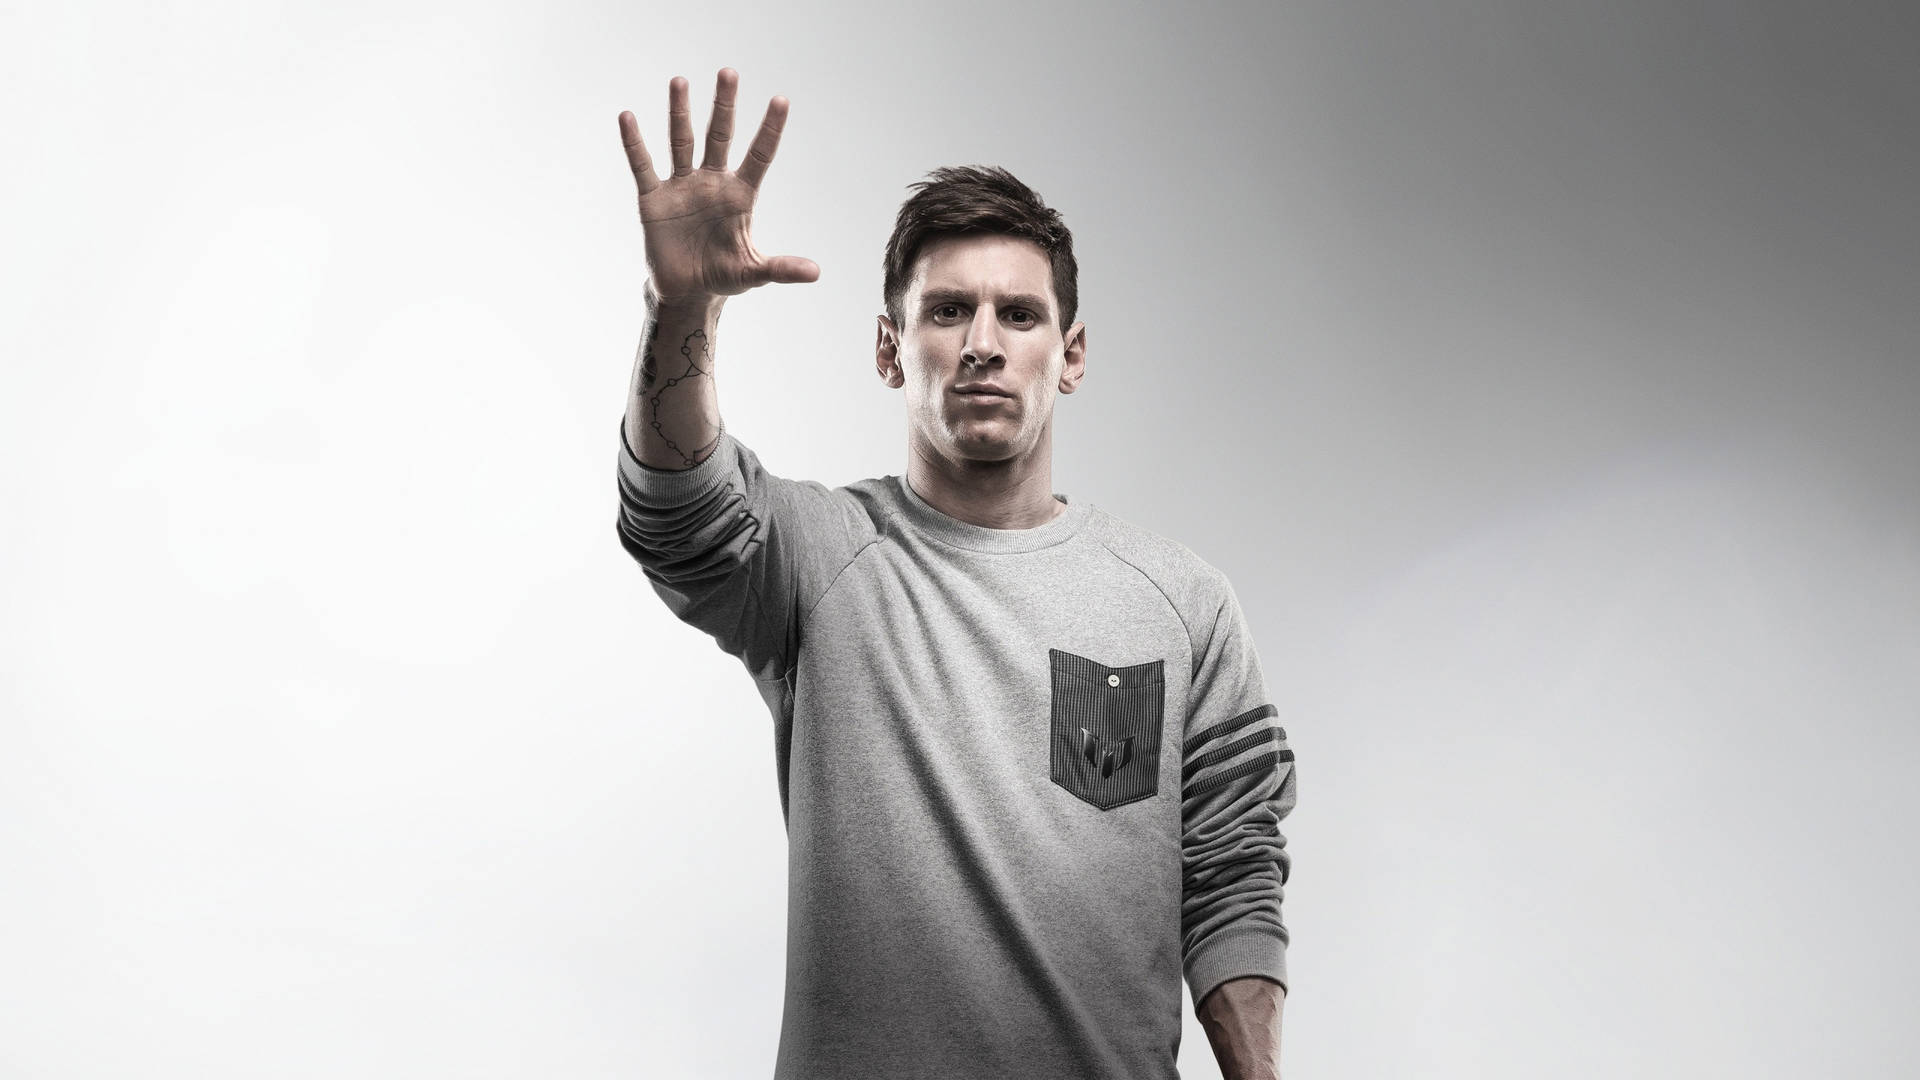 Lionel Messi With His Hand Out